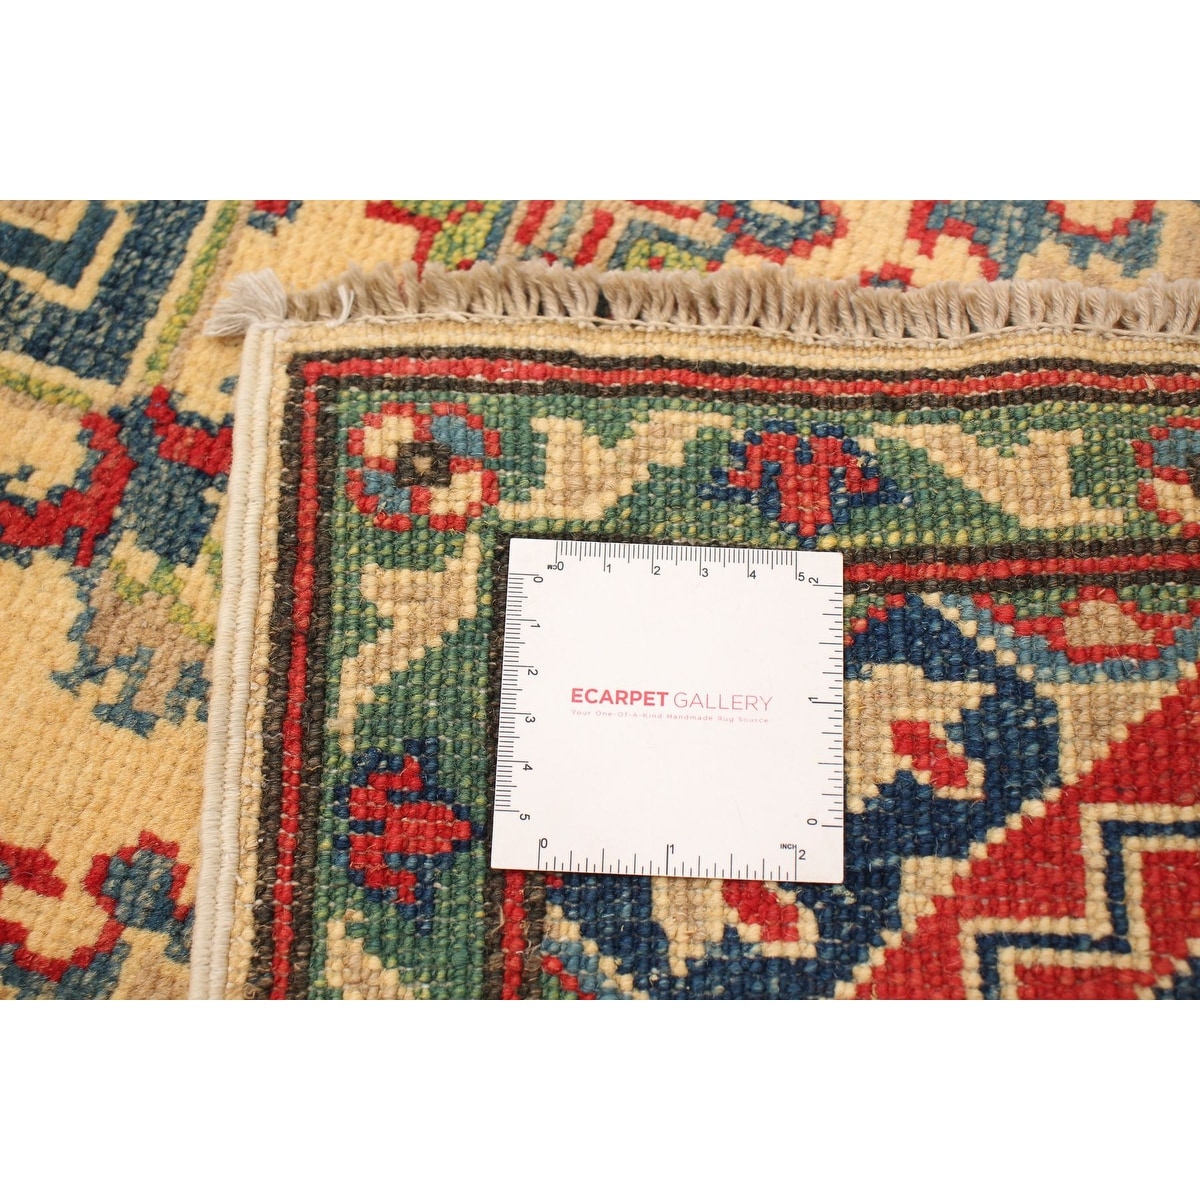 363850 Hand-Knotted Wool Rug eCarpet Gallery Area Rug for Living Room Bedroom Finest Ghazni Bordered Ivory Rug 5'2 x 6'4 